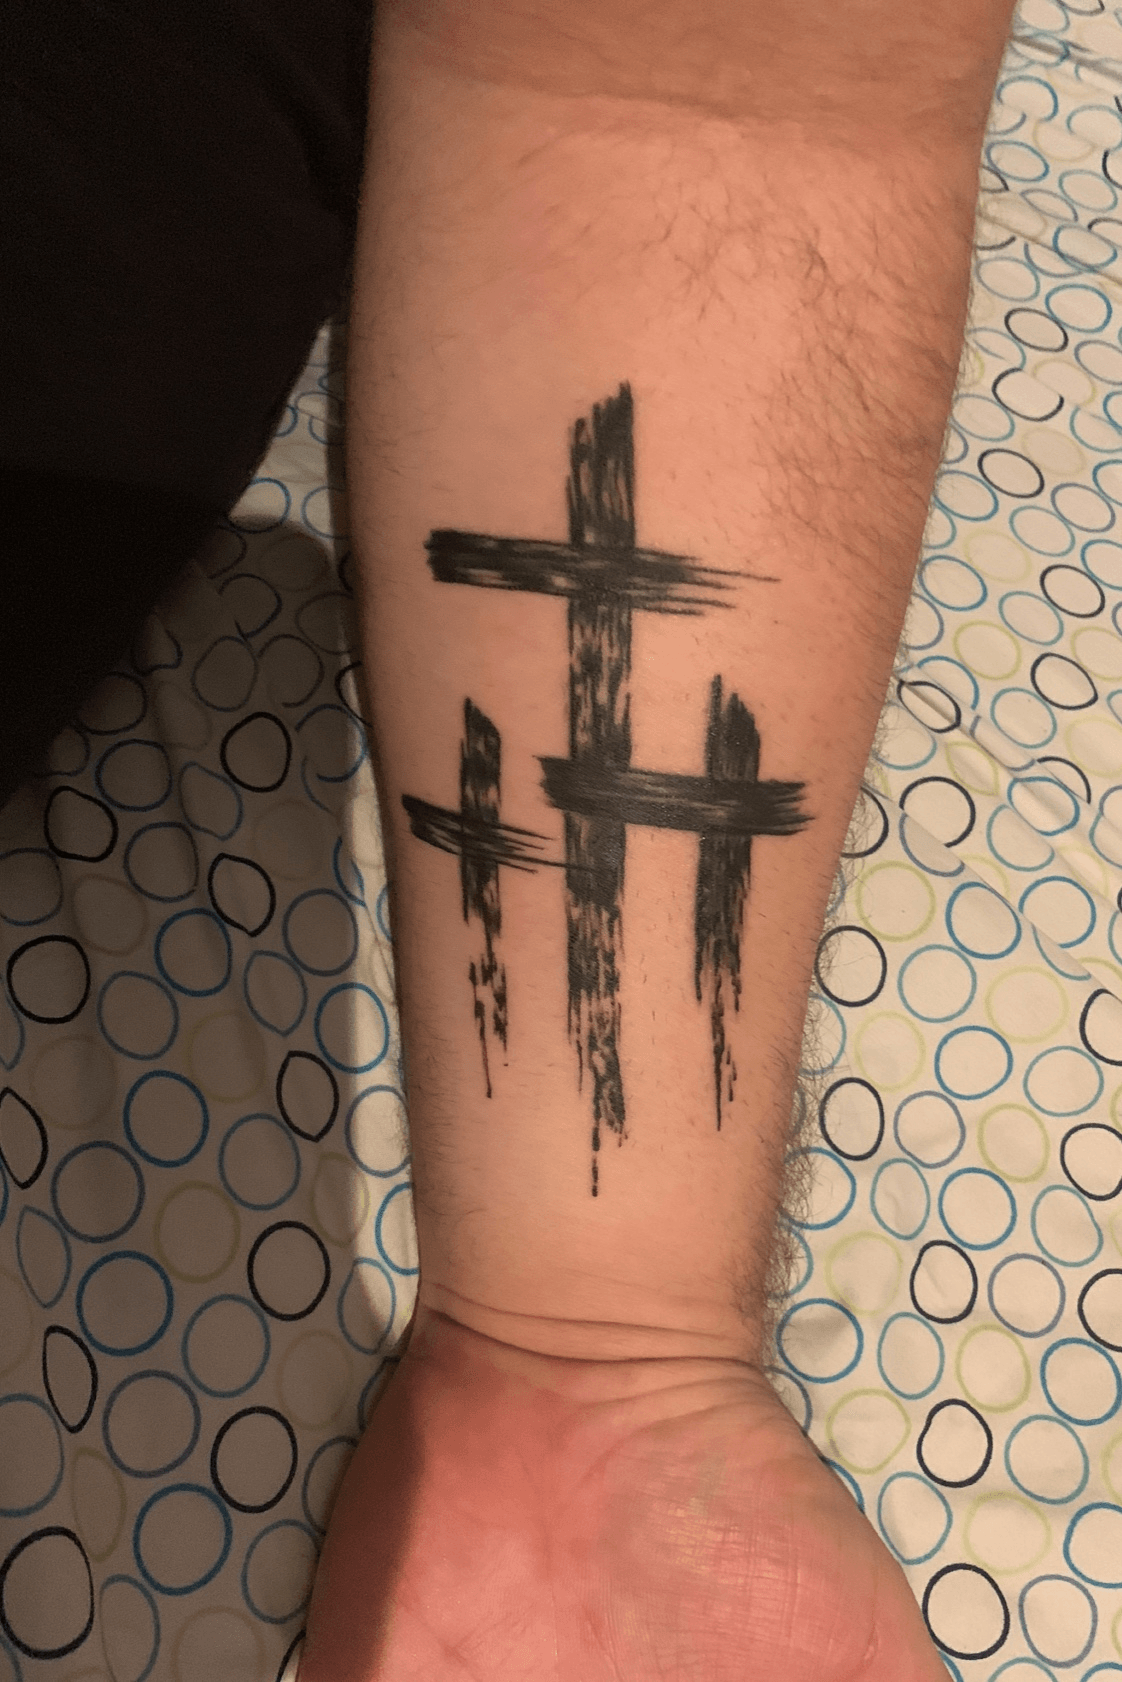 crosses in Tattoos  Search in 13M Tattoos Now  Tattoodo